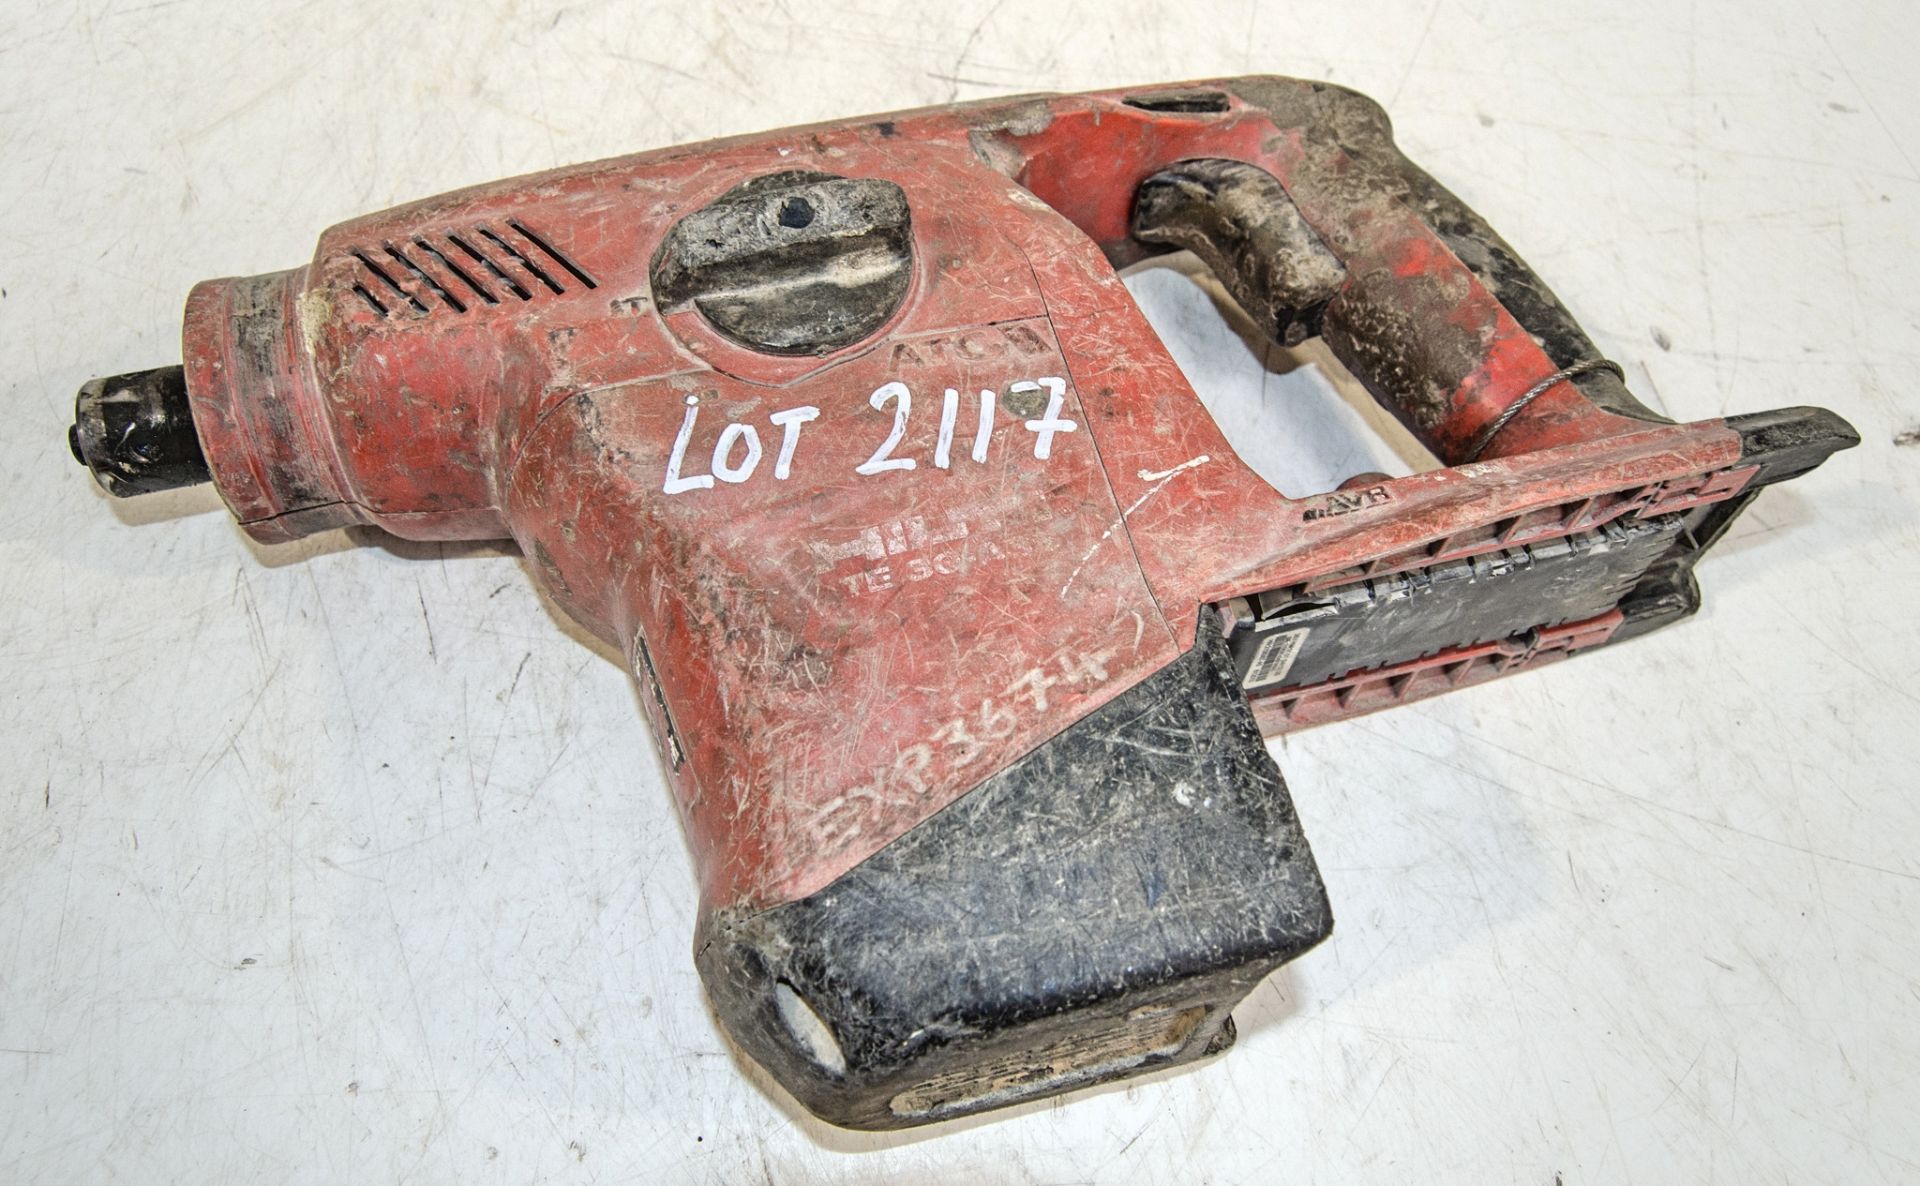 Hilti TE30-A36 36v cordless SDS rotary hammer drill EXP3674 ** No battery, charger or chuck **